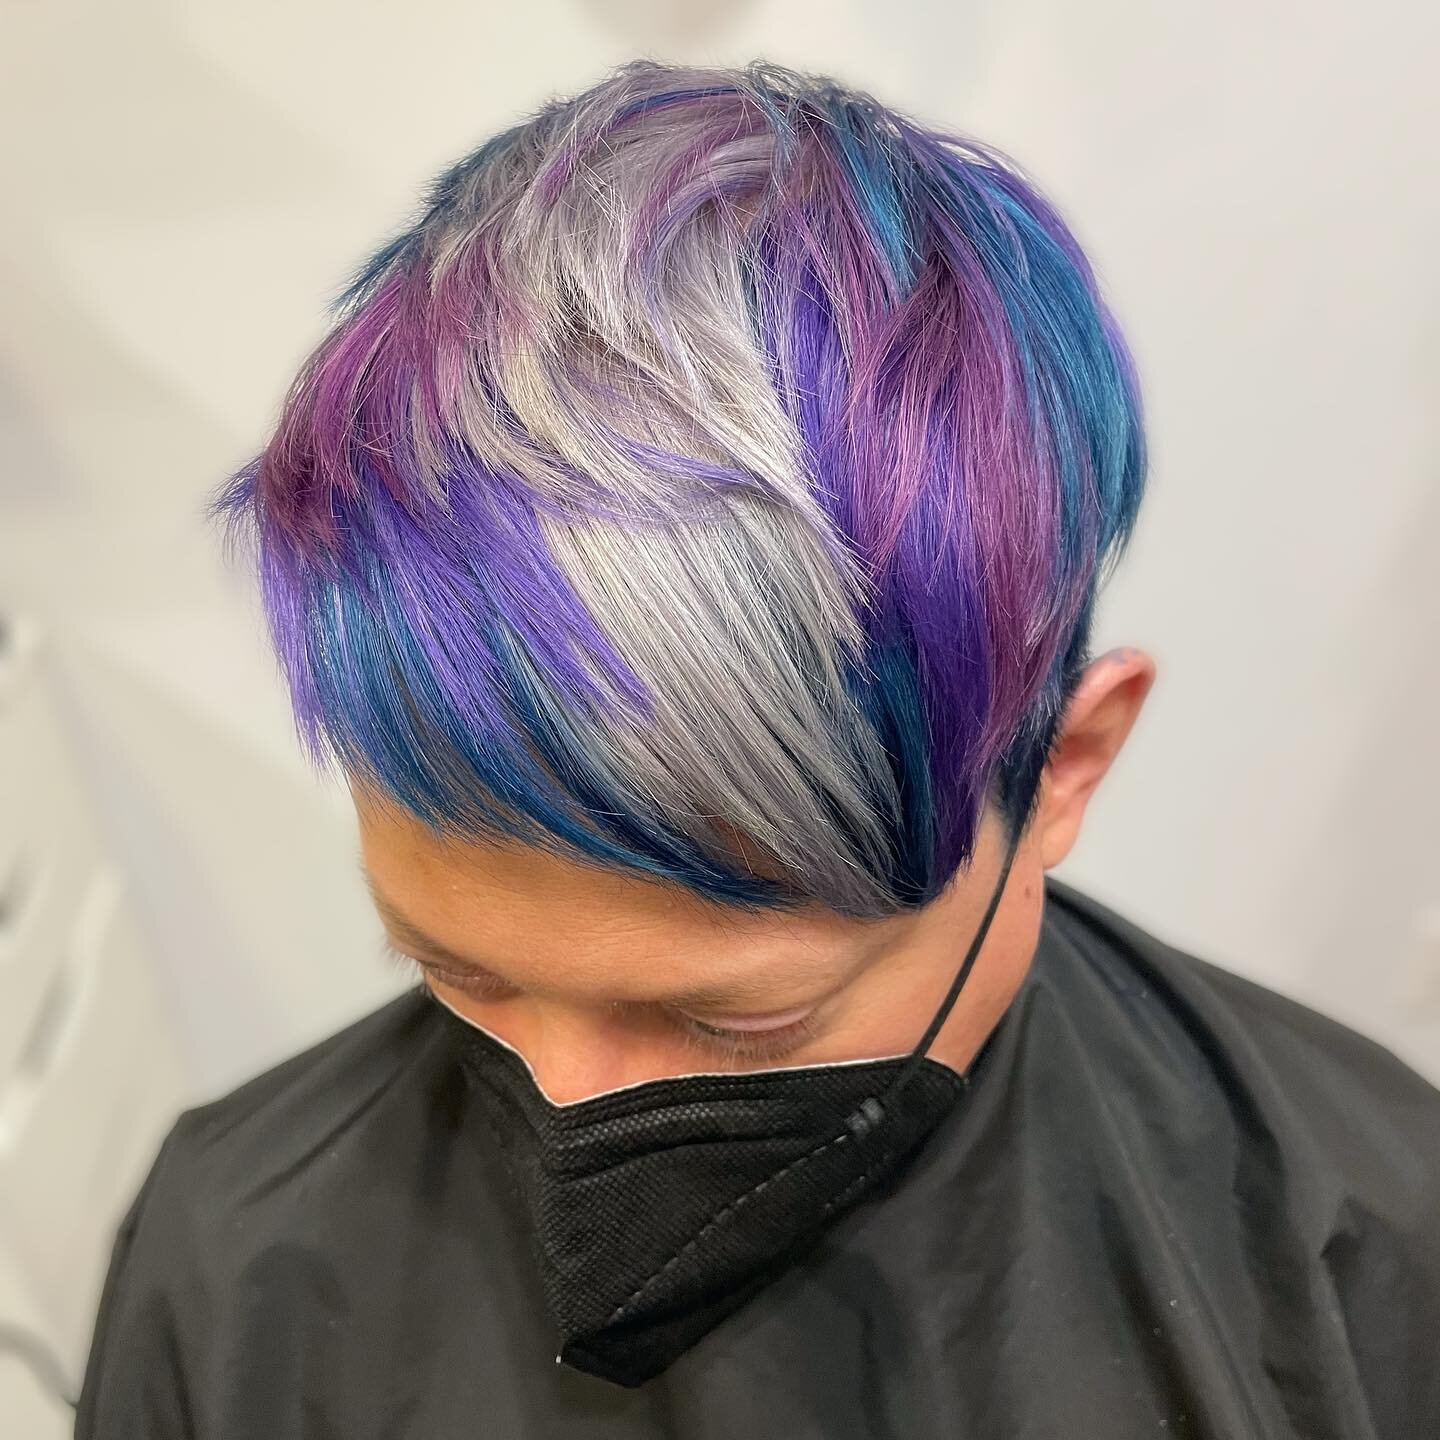 First time vivid!! They said they wanted color inspired by thunderstorms, and all cylinders started firing in my brain! I took a big zig-zag section through the center to act as our lightening bolt. 

Gorgeous silver streak was colored with equal par